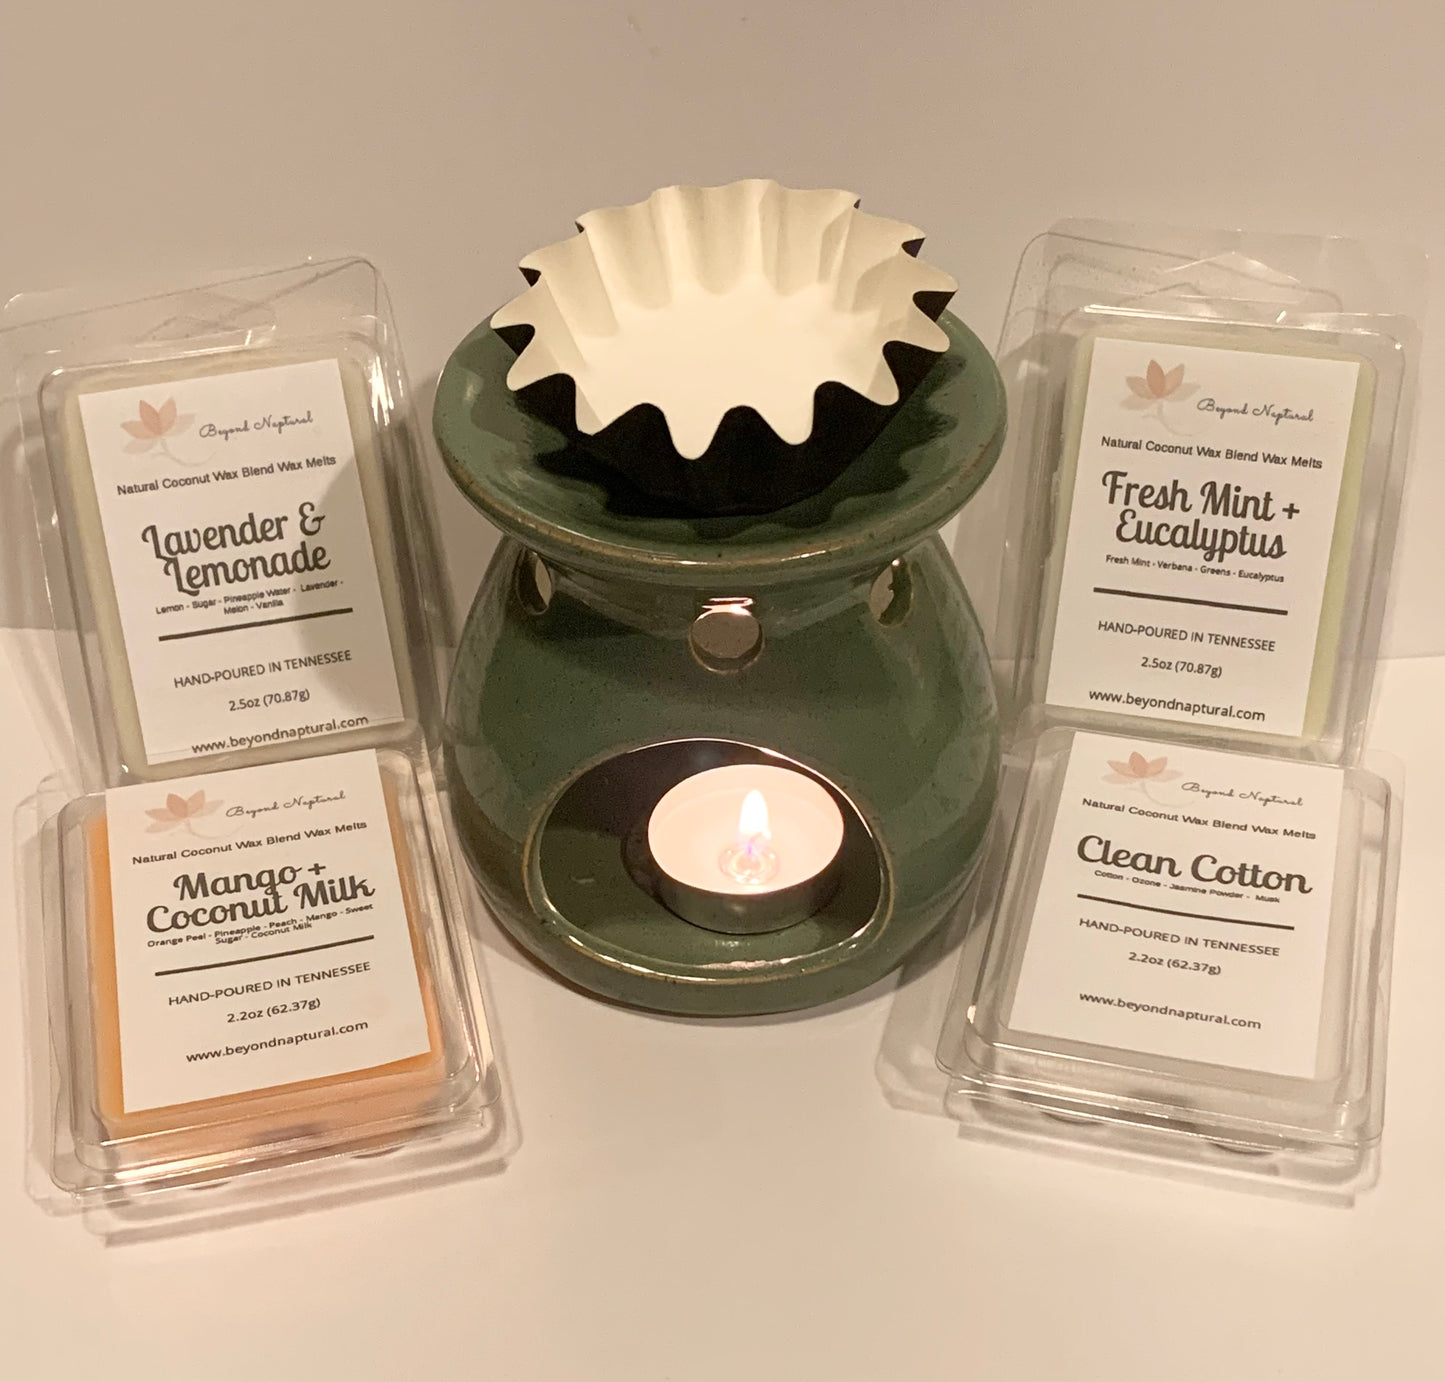 Beyond Naptural Scented Wax Melts